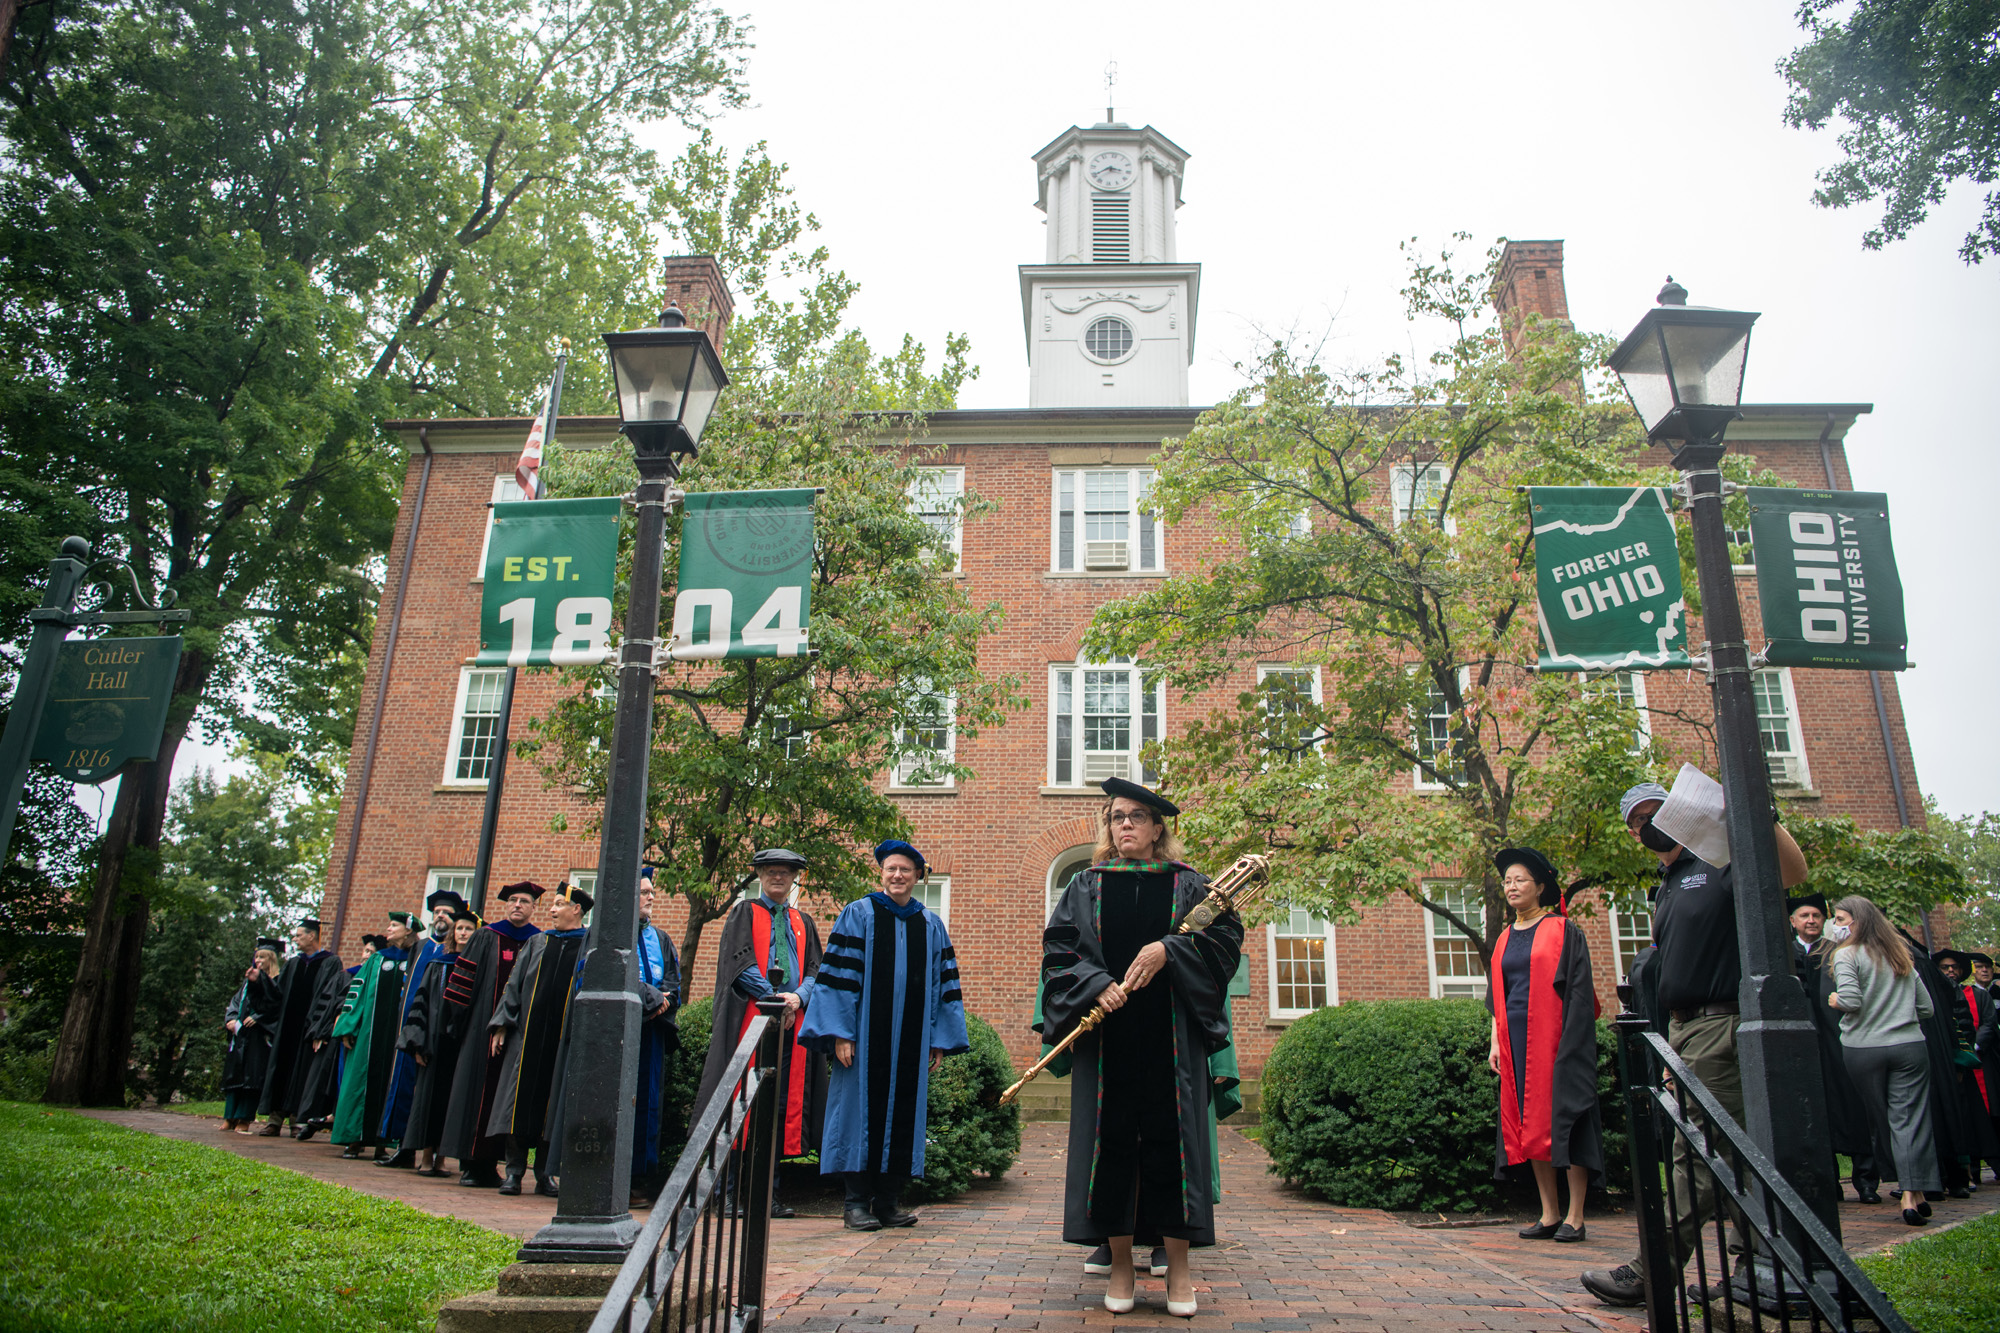 University faculty wear ceremonial robes and stand in front of Cutler Hall for the ceremony